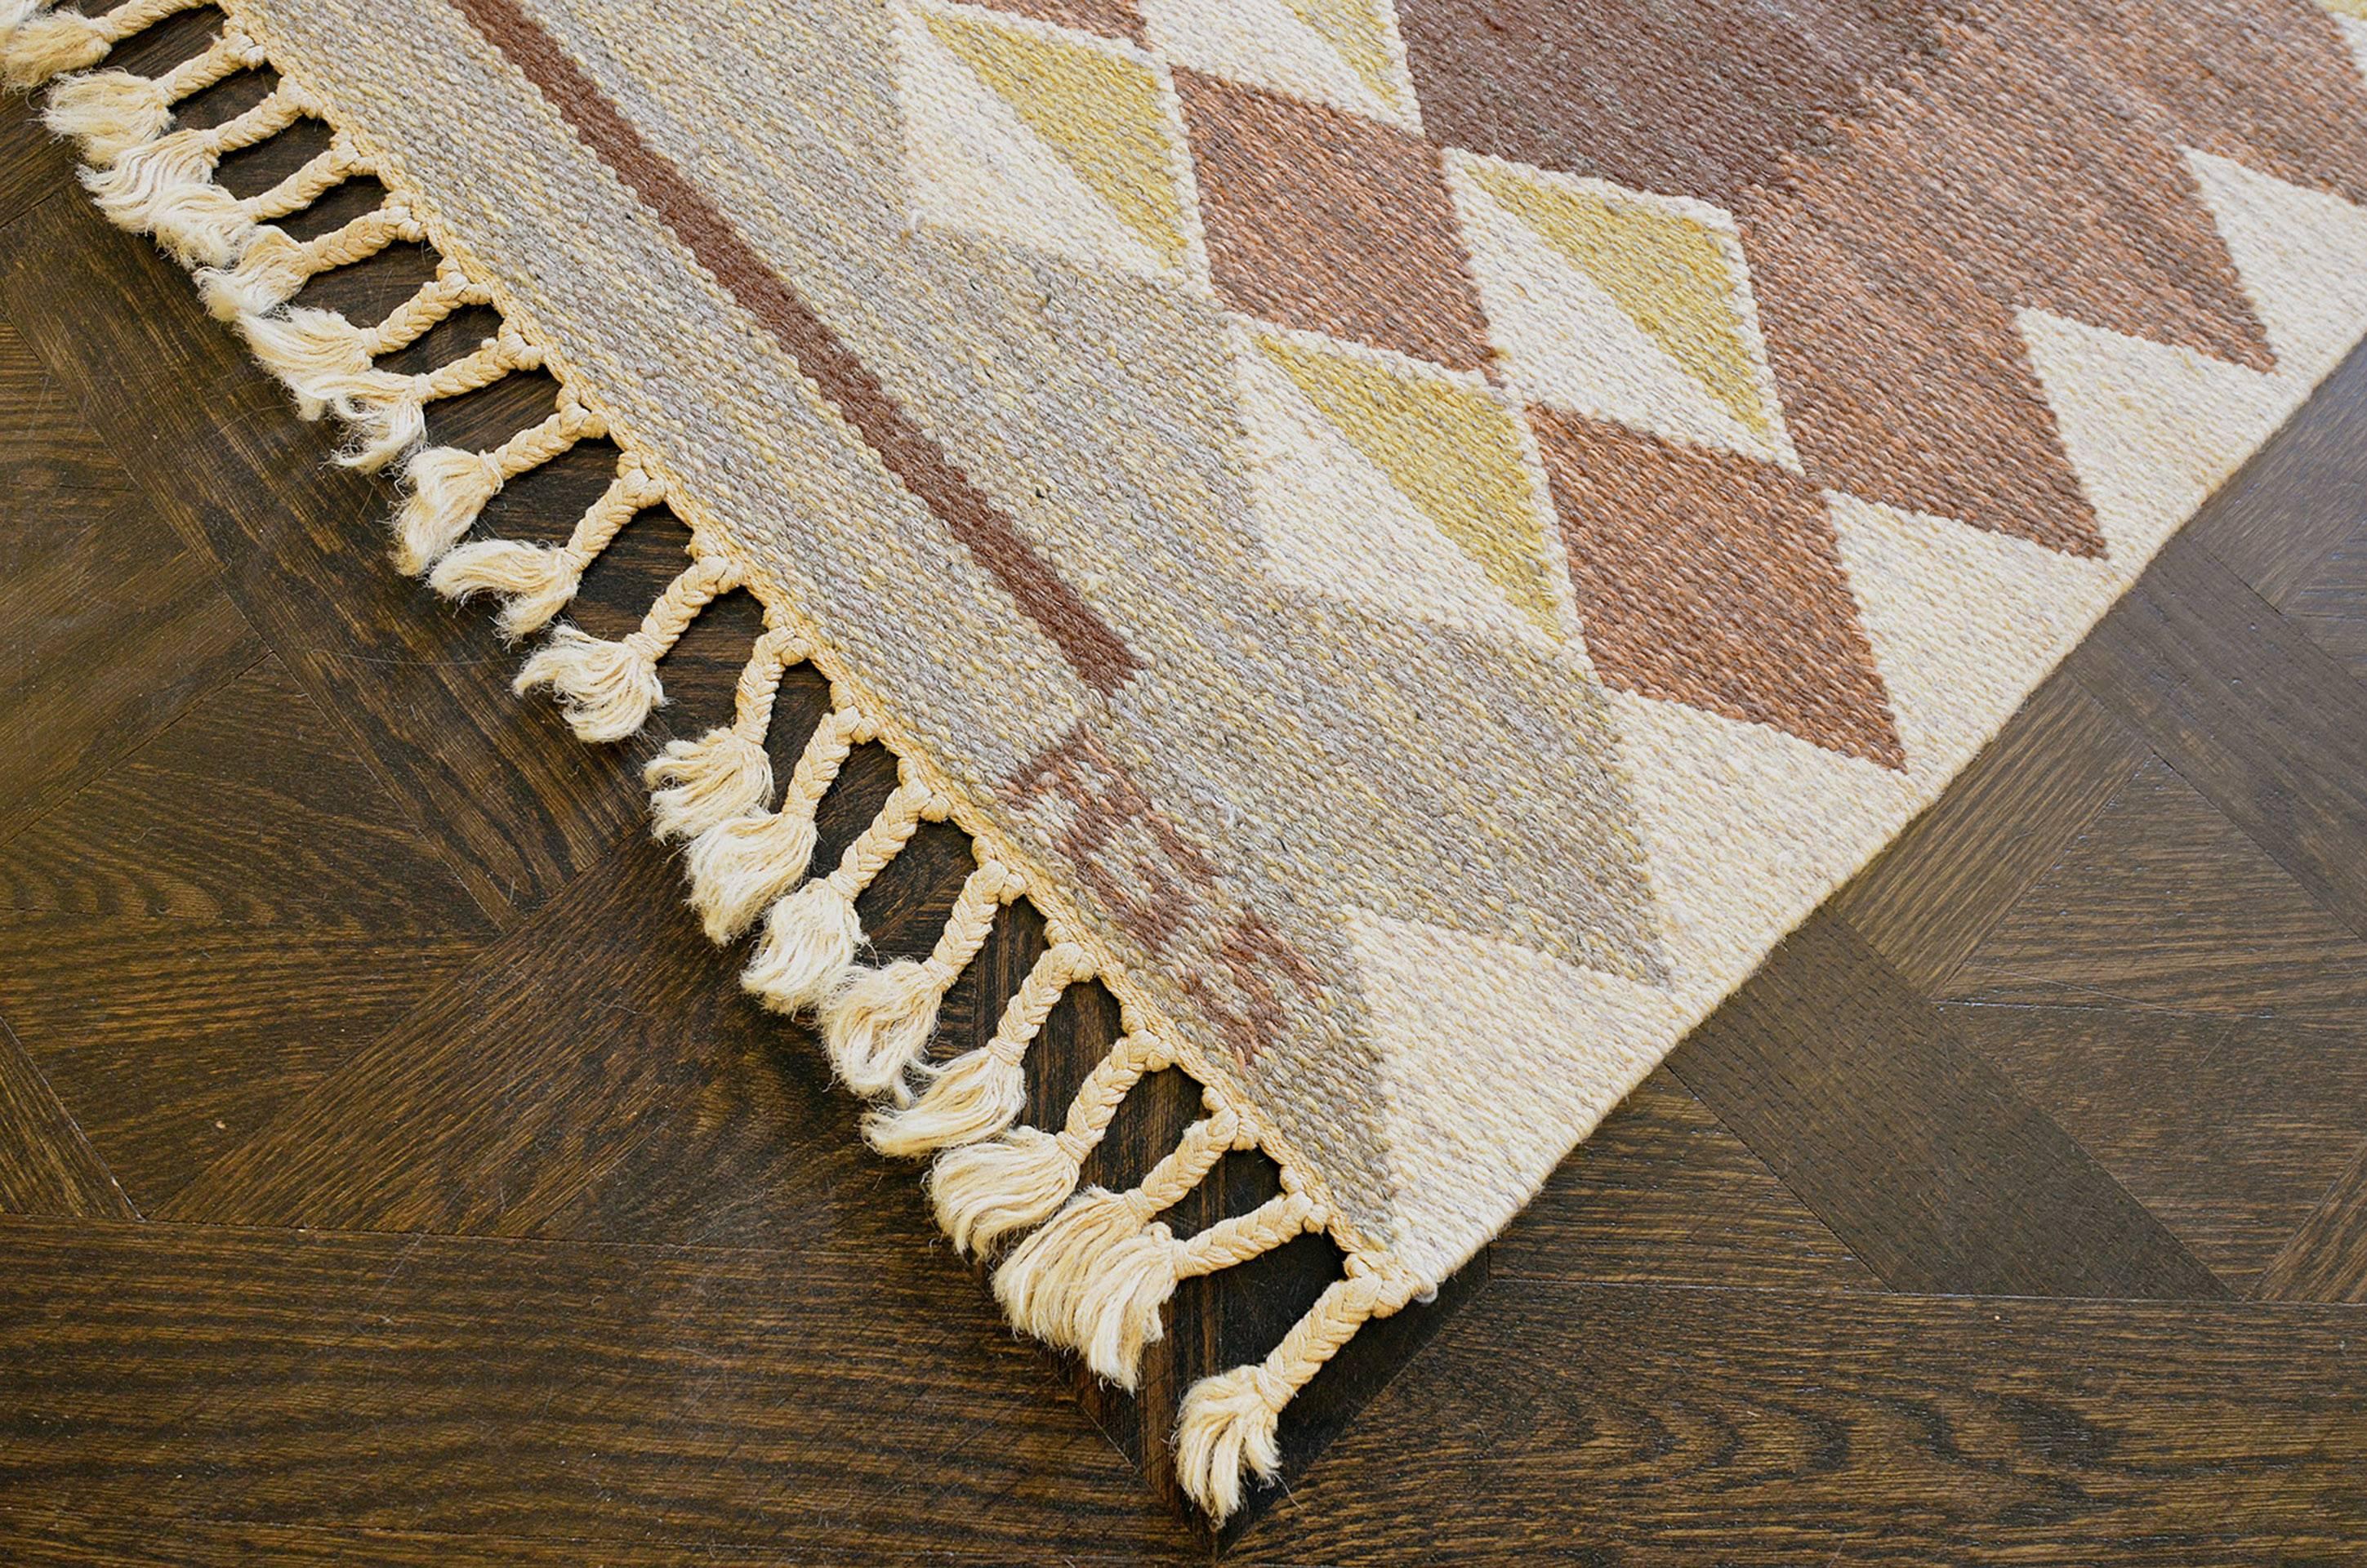 Hand-Woven Mid-20th Century Swedish Rug Signed by Anna Greta Sjoquisten For Sale